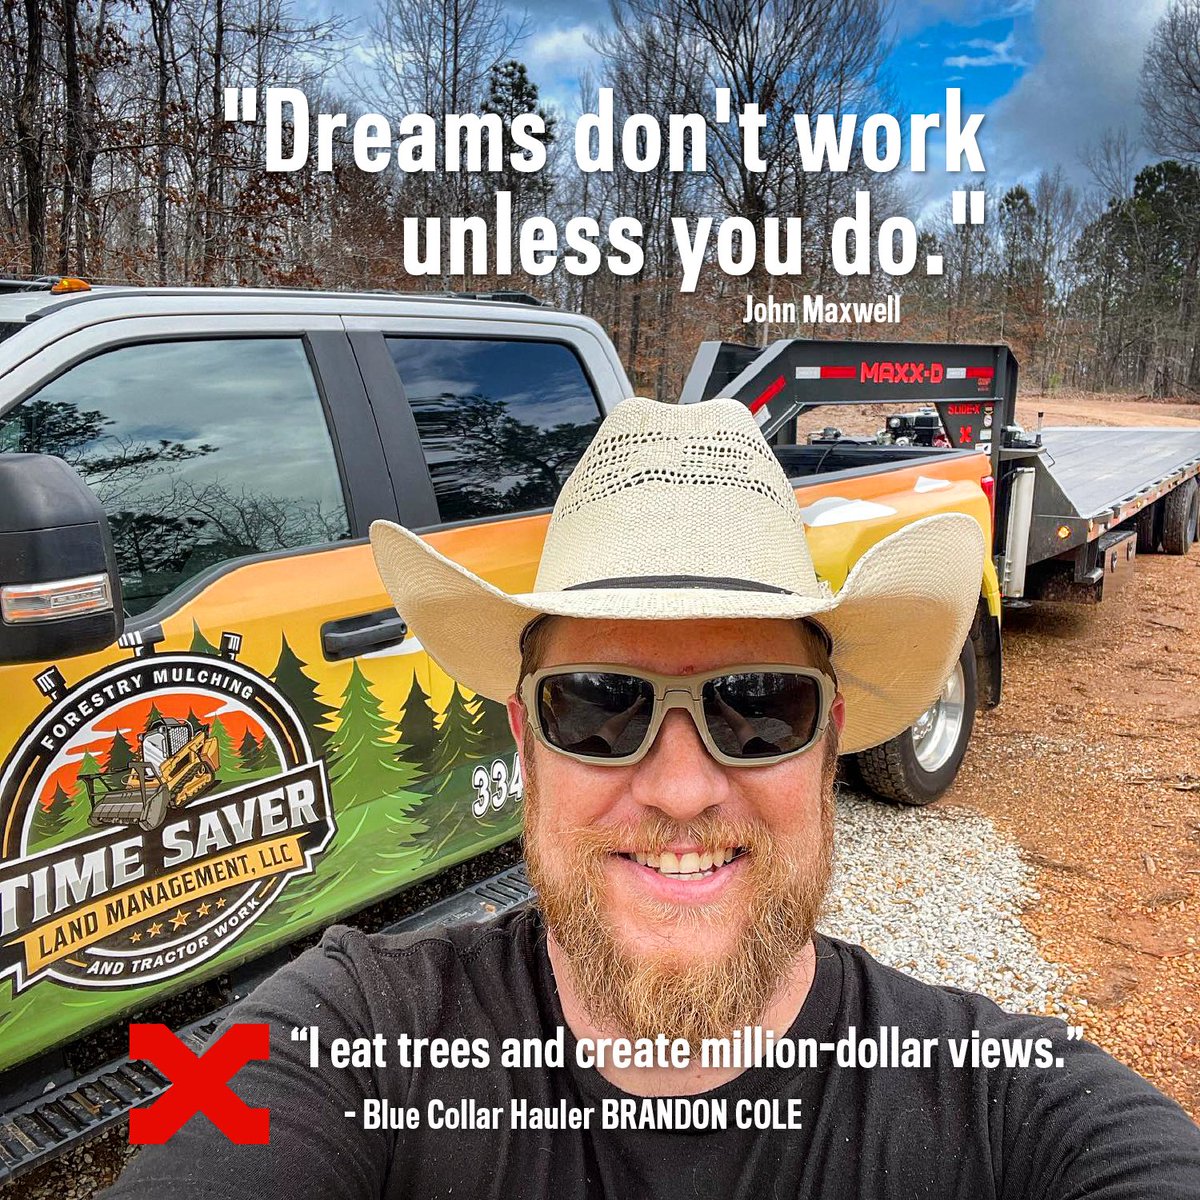 Here's some #mondaymotivation for you #bluecollarhauler professionals out there. Let's get after it!

#maxxd #motivation #hardworkingpeople #bluecollar #bluecollarftw #bluecollarlife #bluecollarhauler #workhardstayhumble #dreambigworkhard #maxxdtrailers